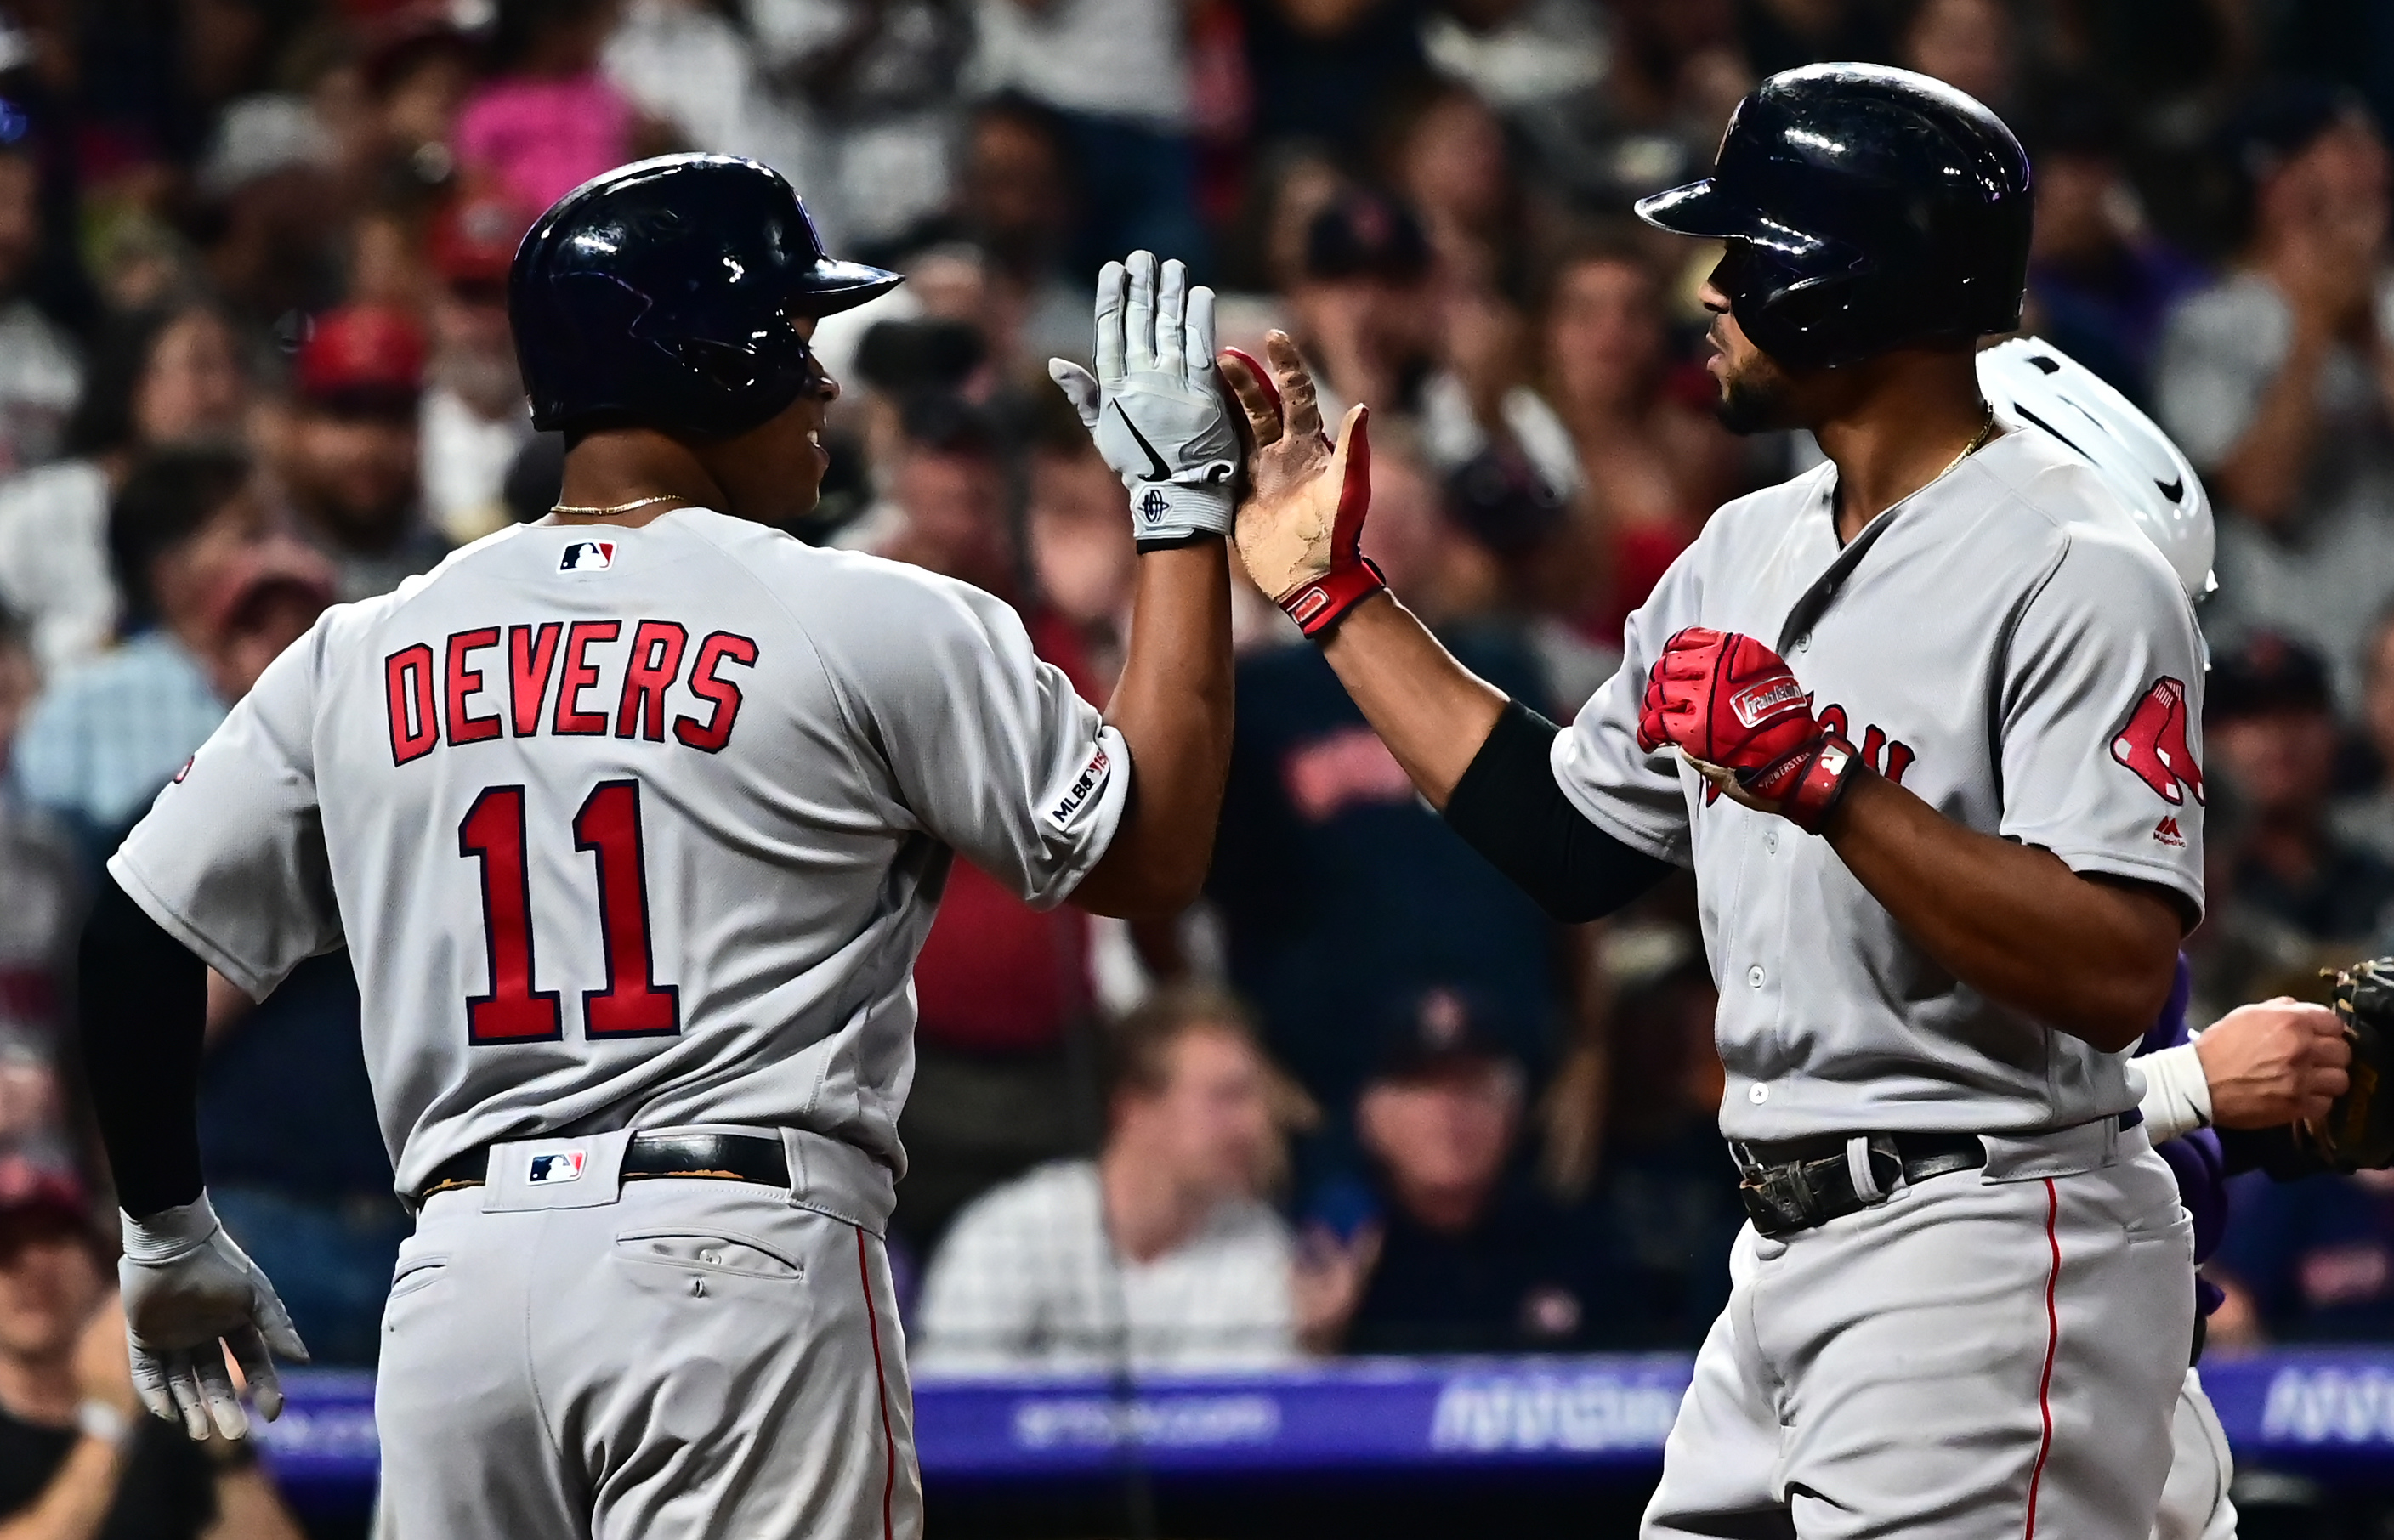 Red Sox sweep series, trounce Rockies in second consecutive game